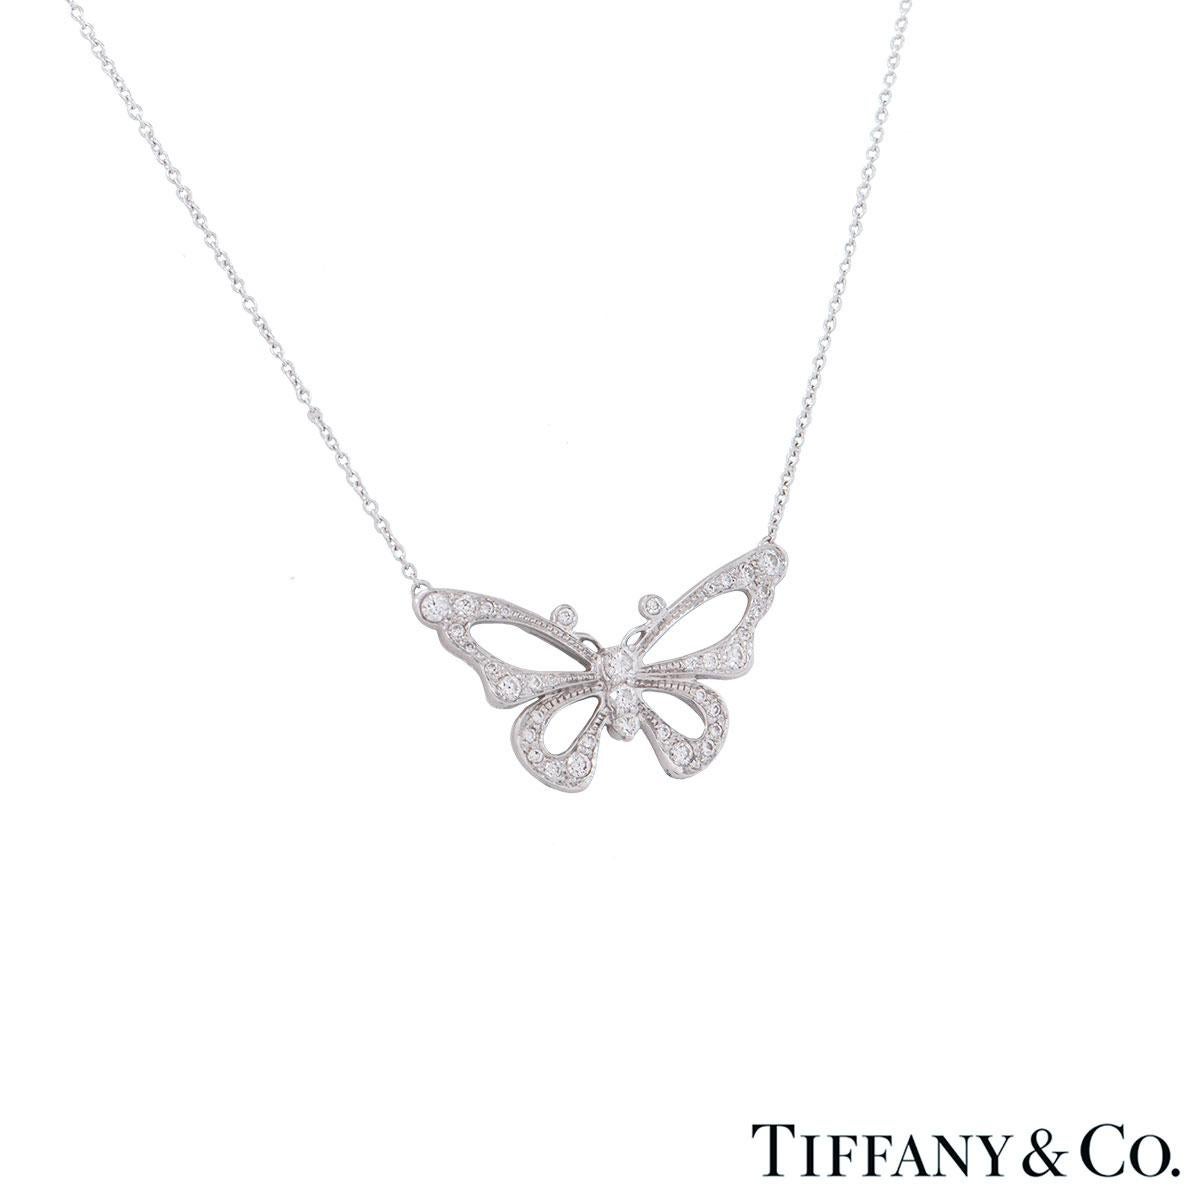 A stunning platinum diamond pendant by Tiffany & Co. from the Enchant collection. The pendant features a butterfly motif pave set with 37 round brilliant cut diamonds with a total weight of 0.68ct. The butterfly measures 2.9cm in length and 1.6cm in